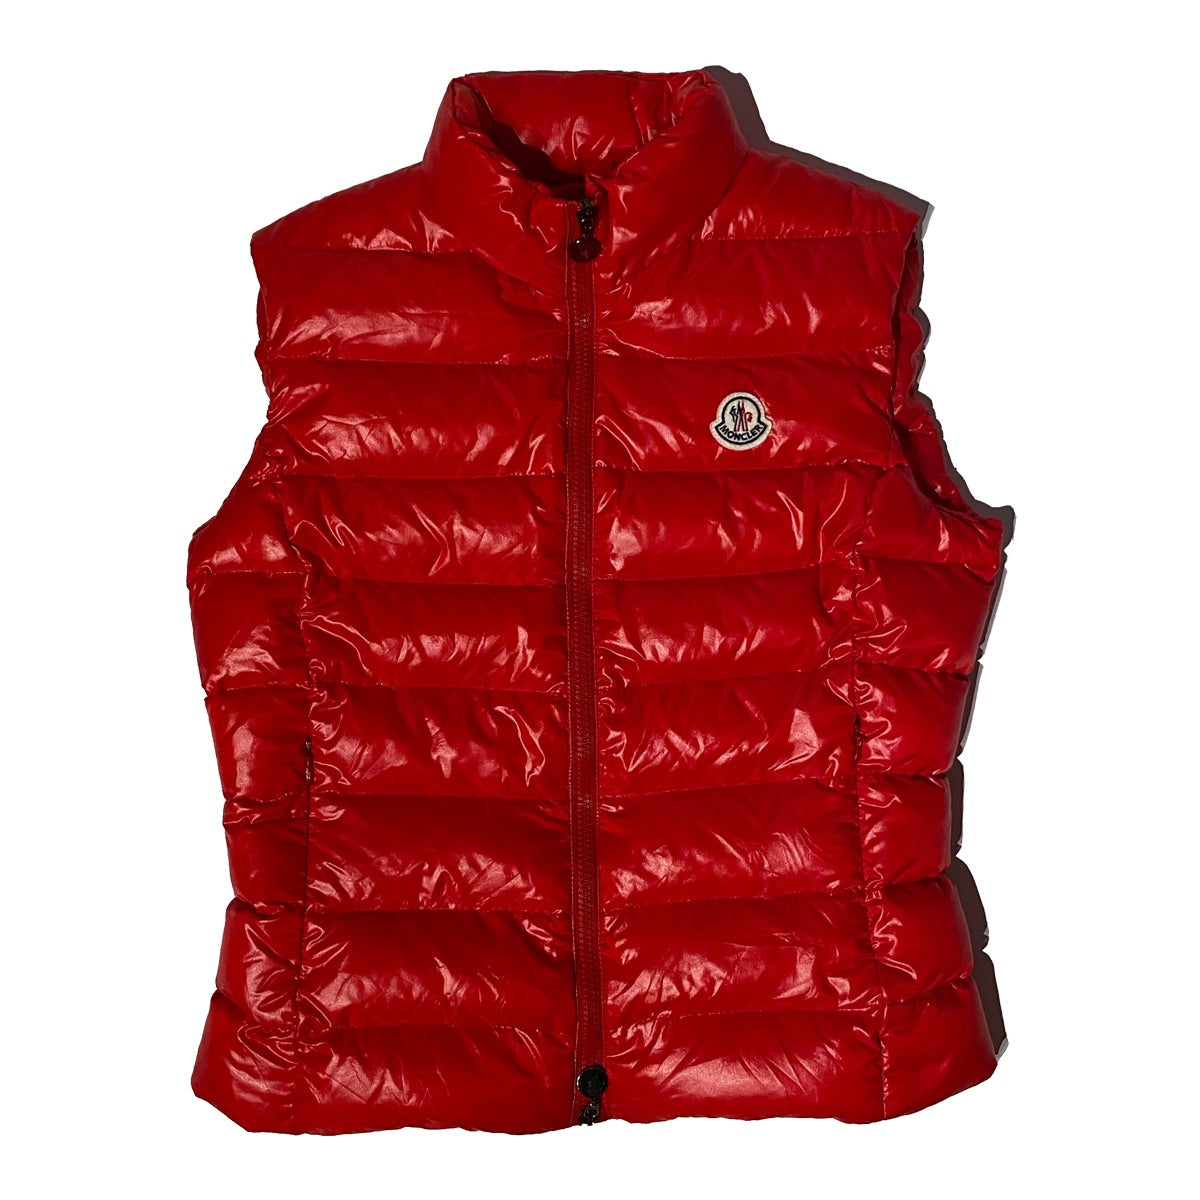 Moncler Ghany Gilet - Size 1